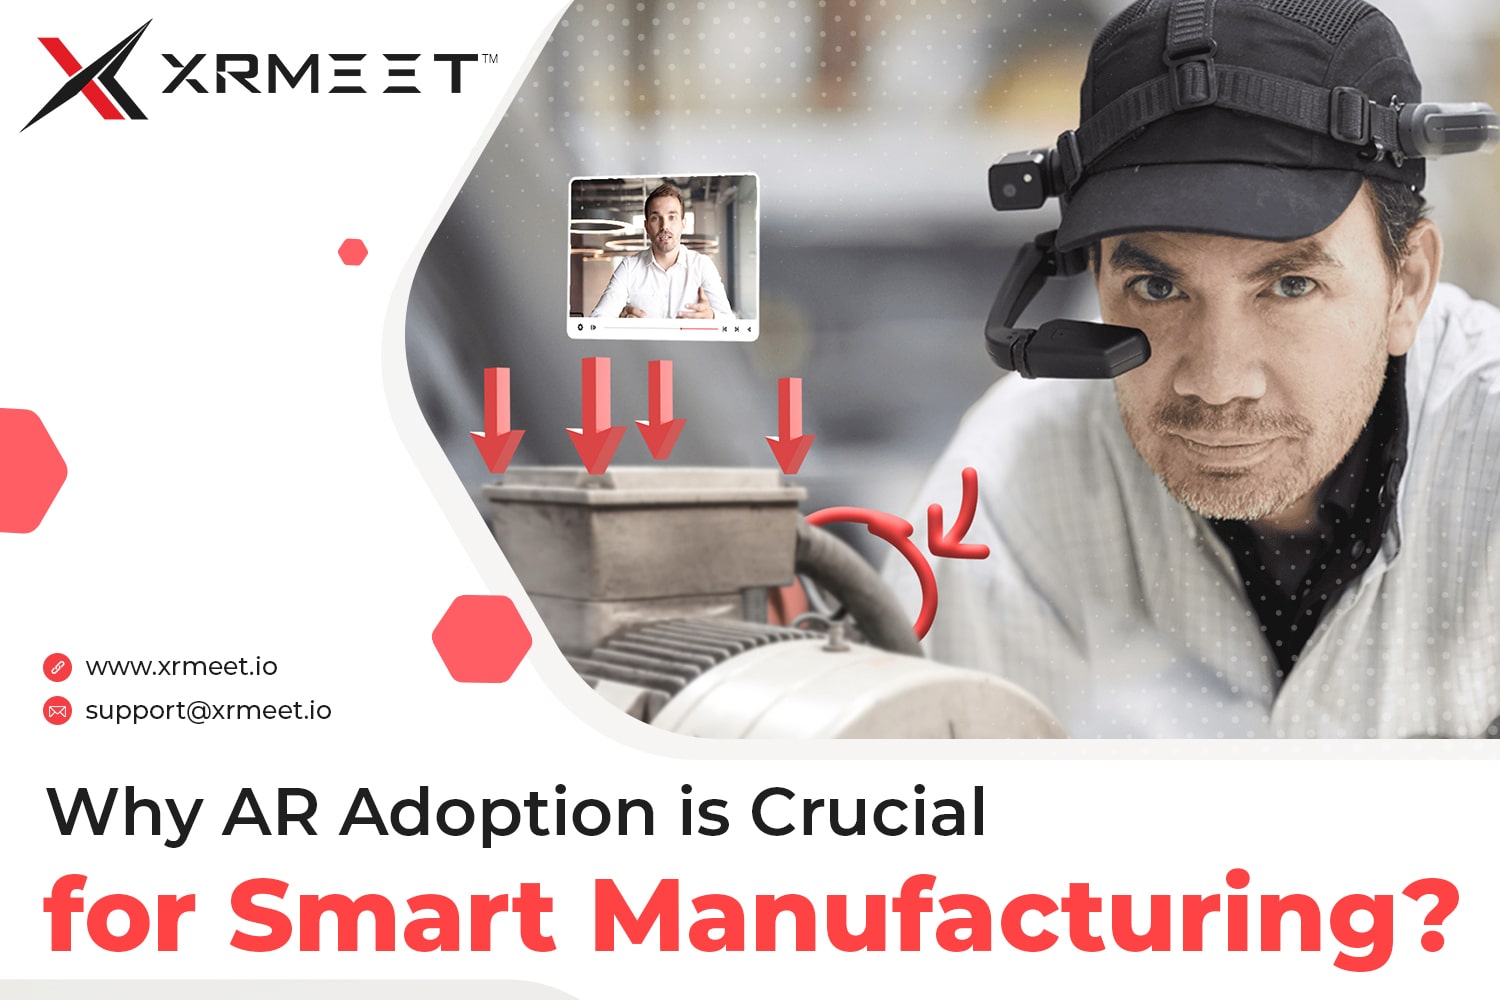 adoption of AR in smart manufacturing